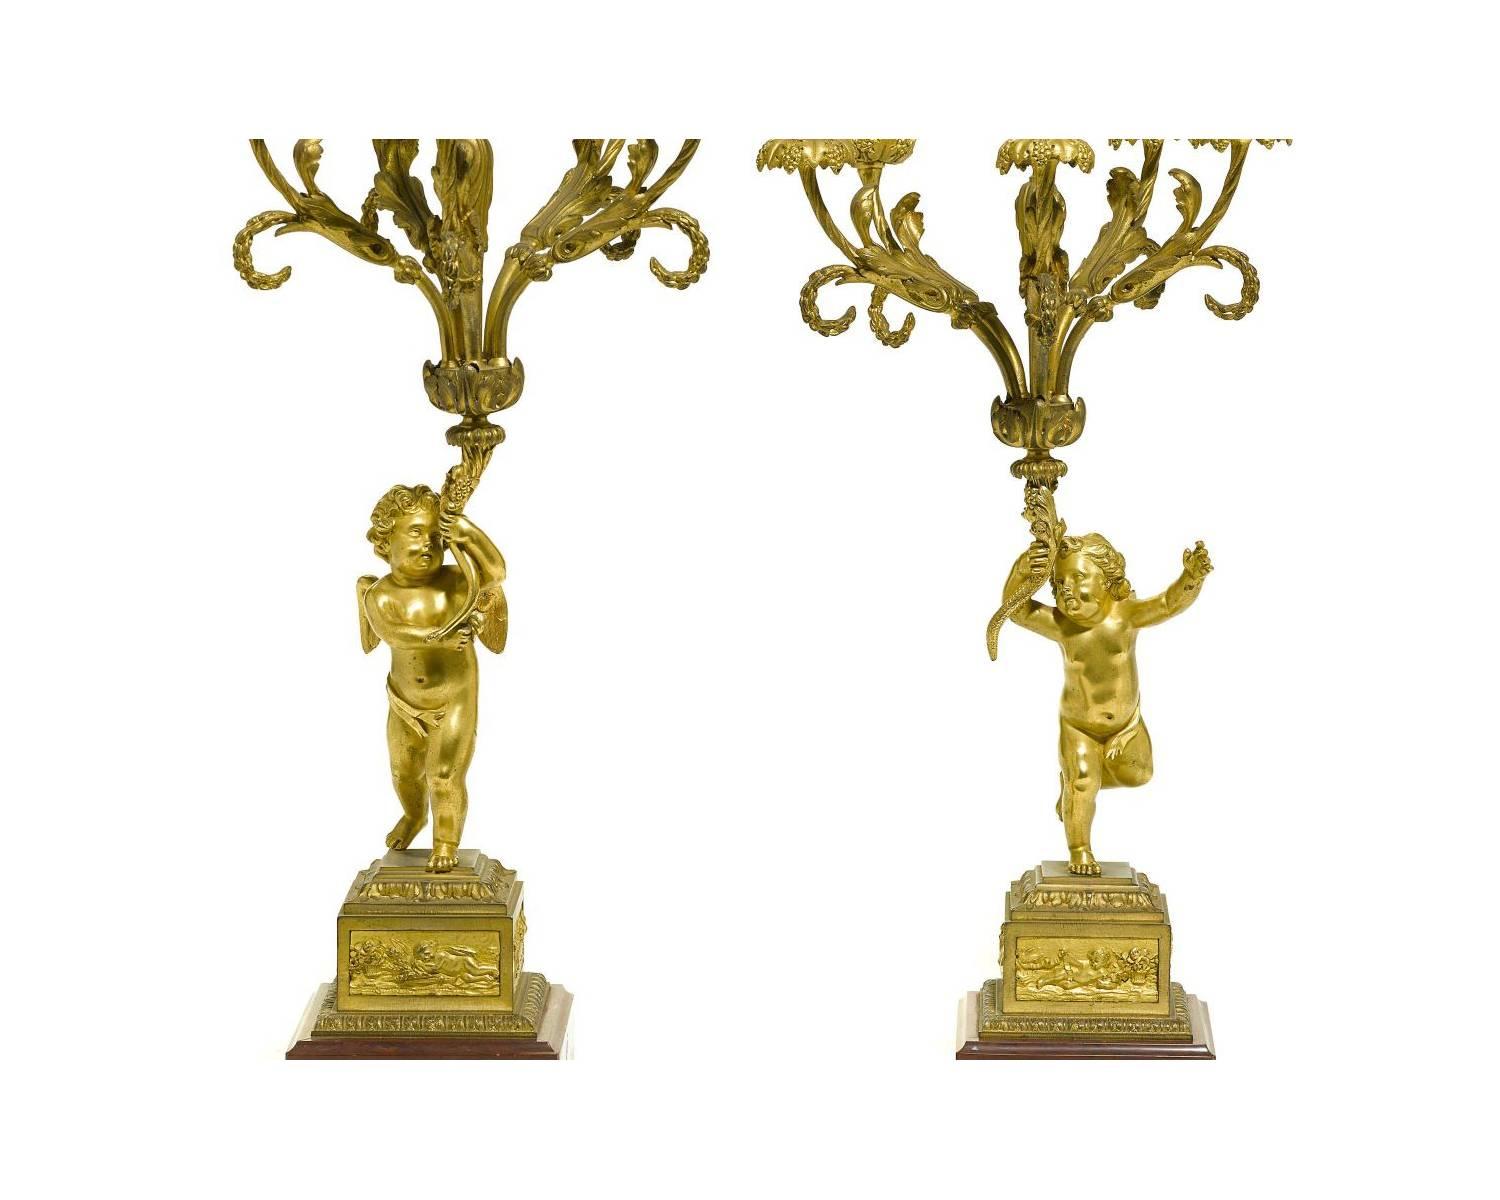 A very fine pair of French 19th century Louis XV style figural gilt bronze and rouge marble six-light candelabra, each with a figure of a standing cherub holding the ornate scrolled arm candelabra, crowned with a gilt bronze candle snuffer in the